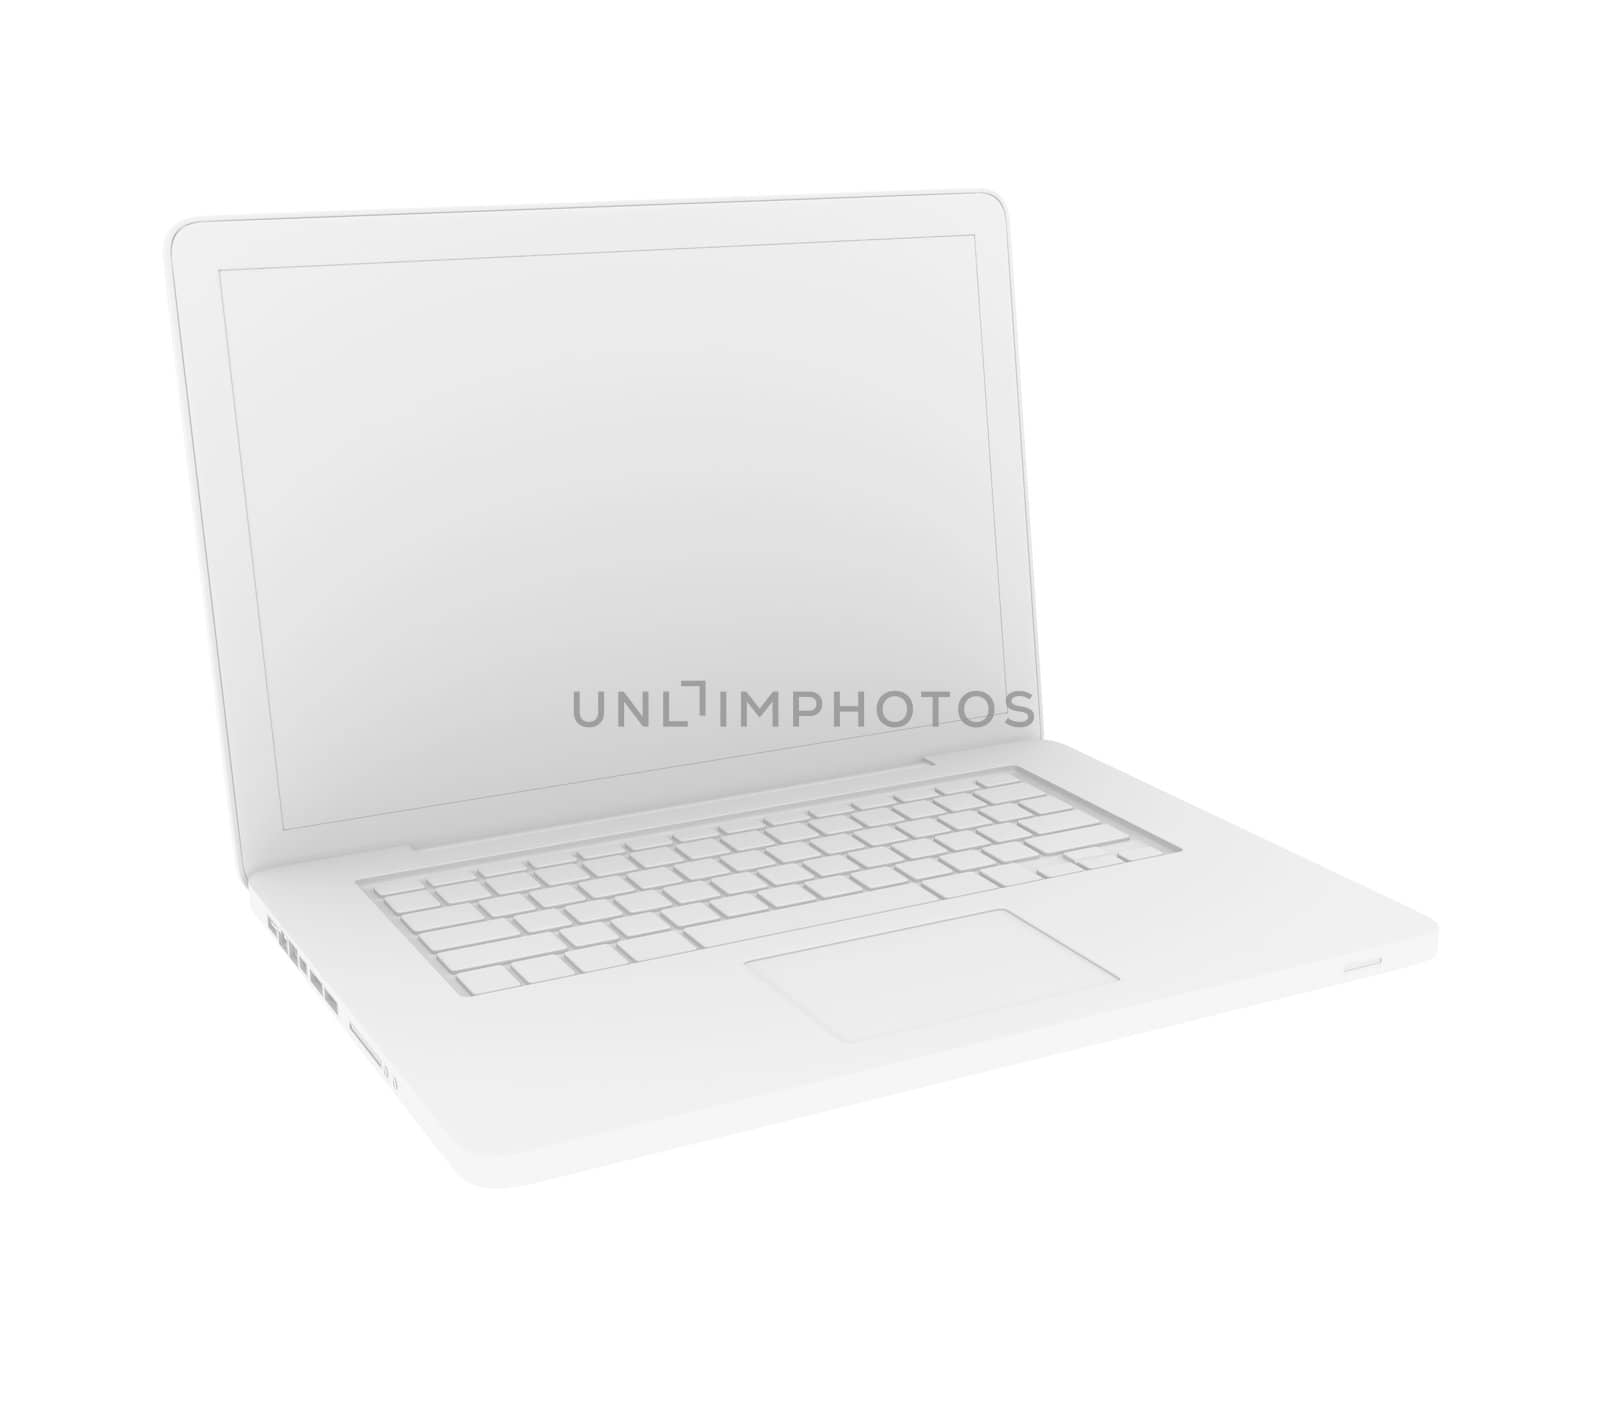 Laptop. Isolated on white background with empty space